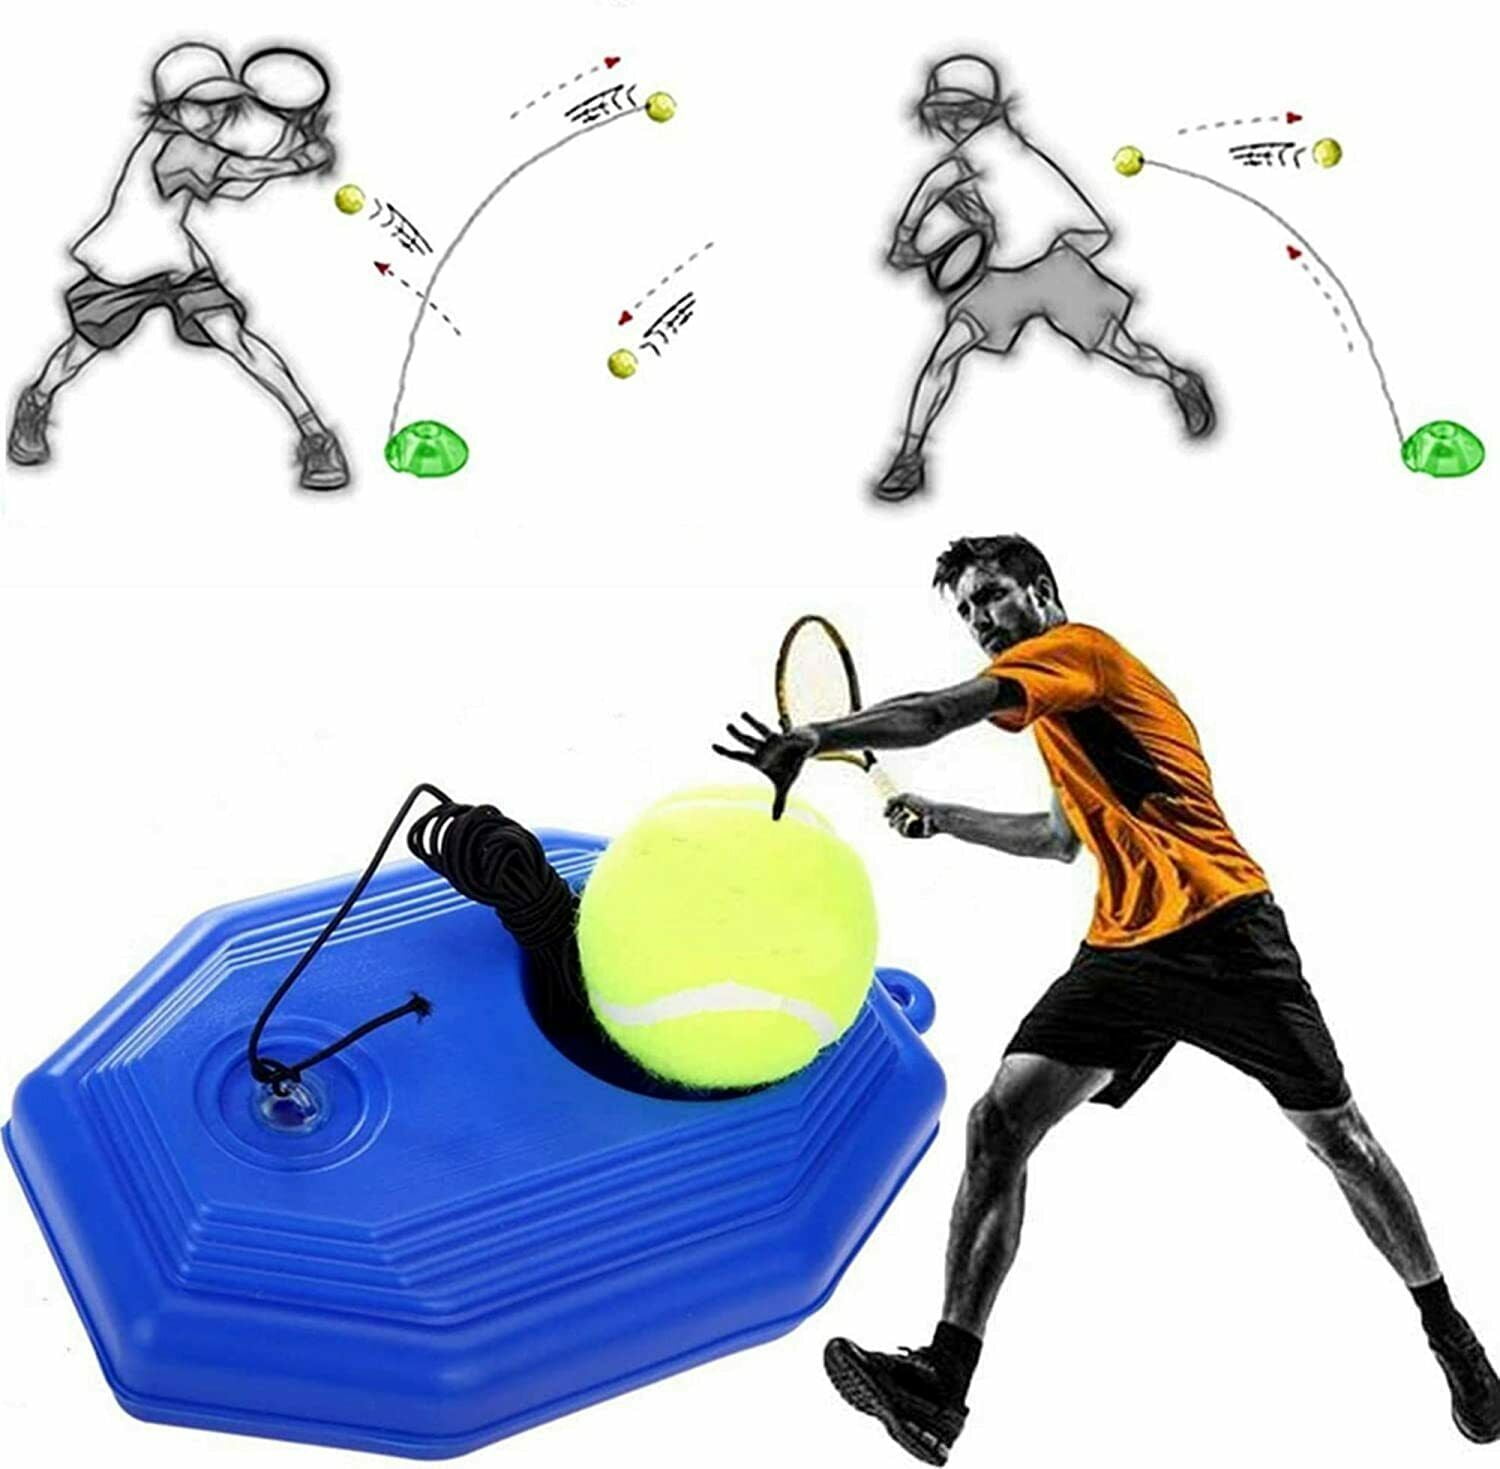 Tennis Trainer Hit Swing Self-Study Practice Tool Equipment with Ball Holder